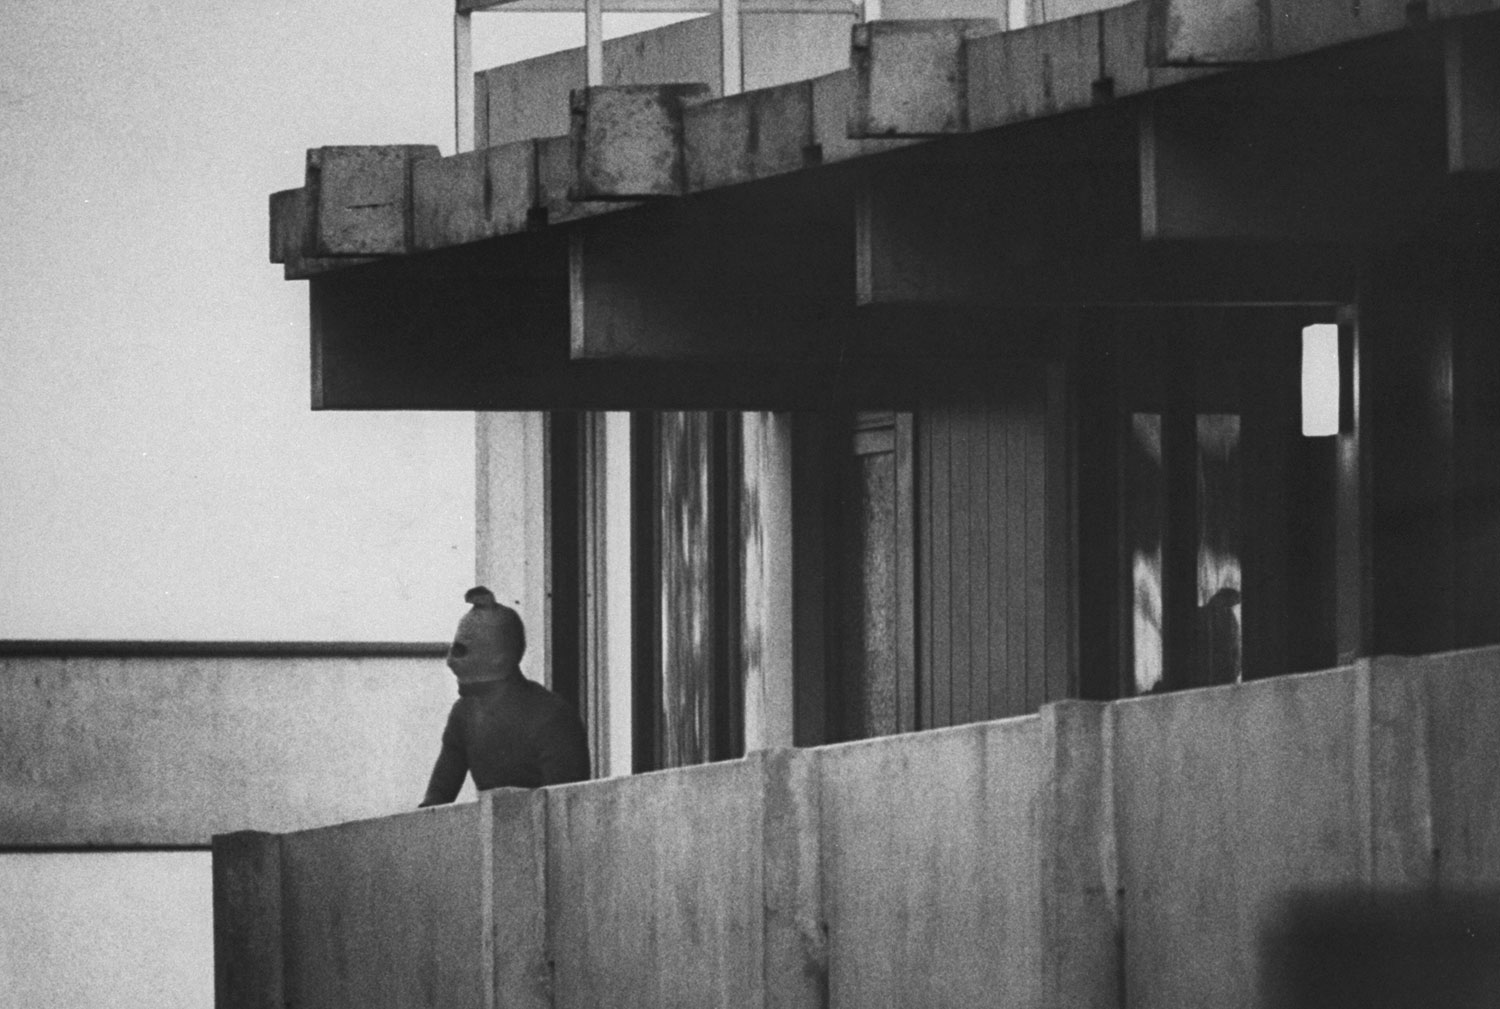 A Black September terrorist looks from the balcony of an apartment where Israeli Olympic team members are held hostage, Munich, September 1972. (Co Rentmeester—Time &amp; Life Pictures/Getty Images)